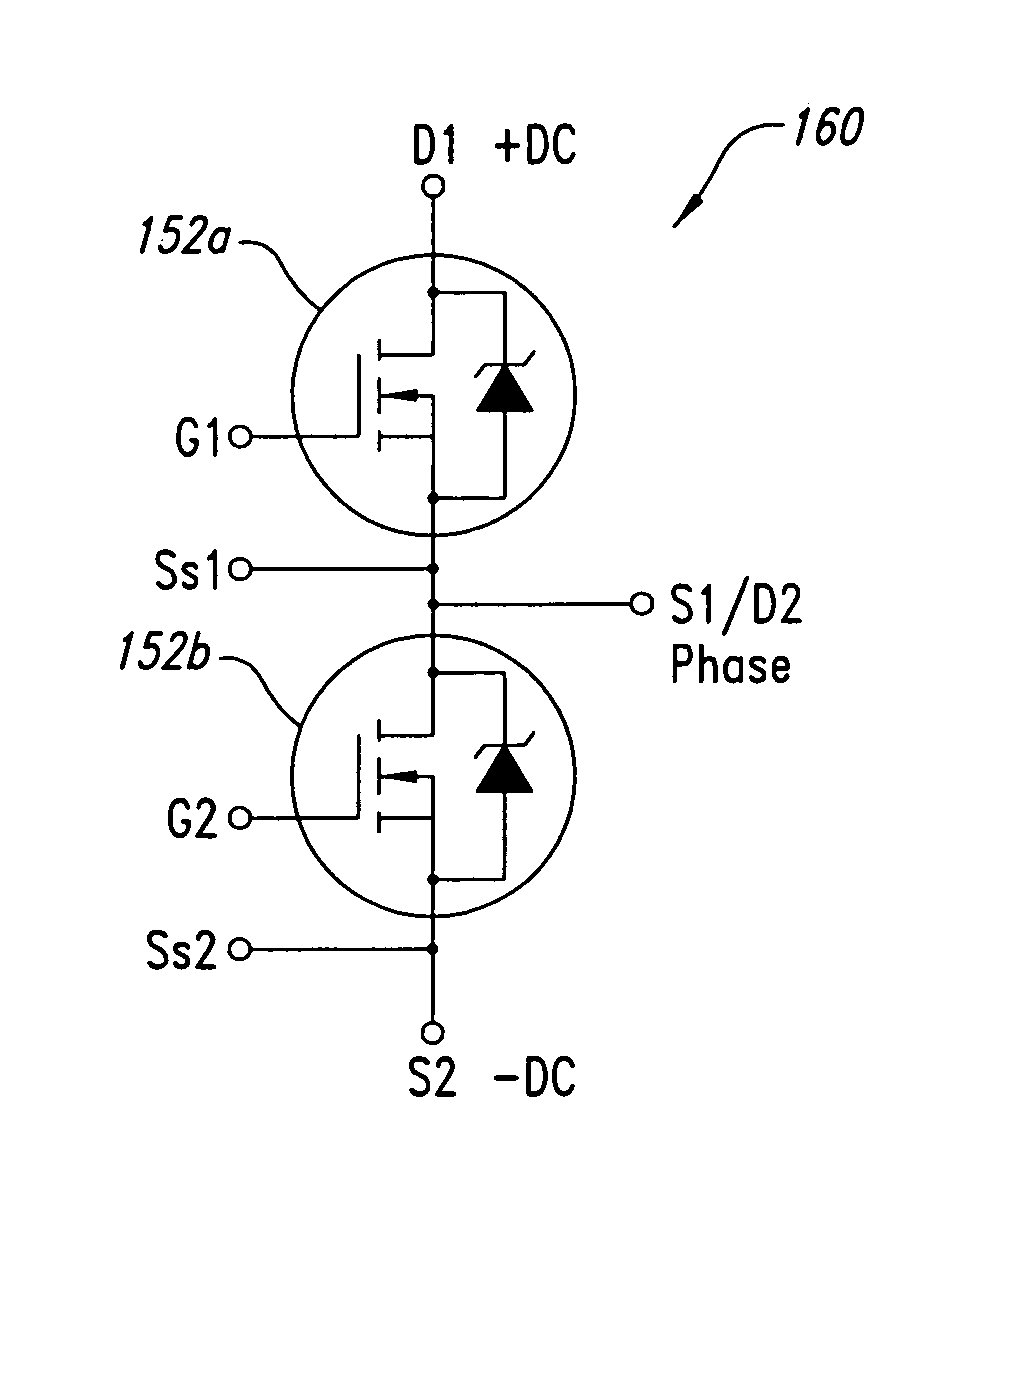 Architecture for power modules such as power inverters